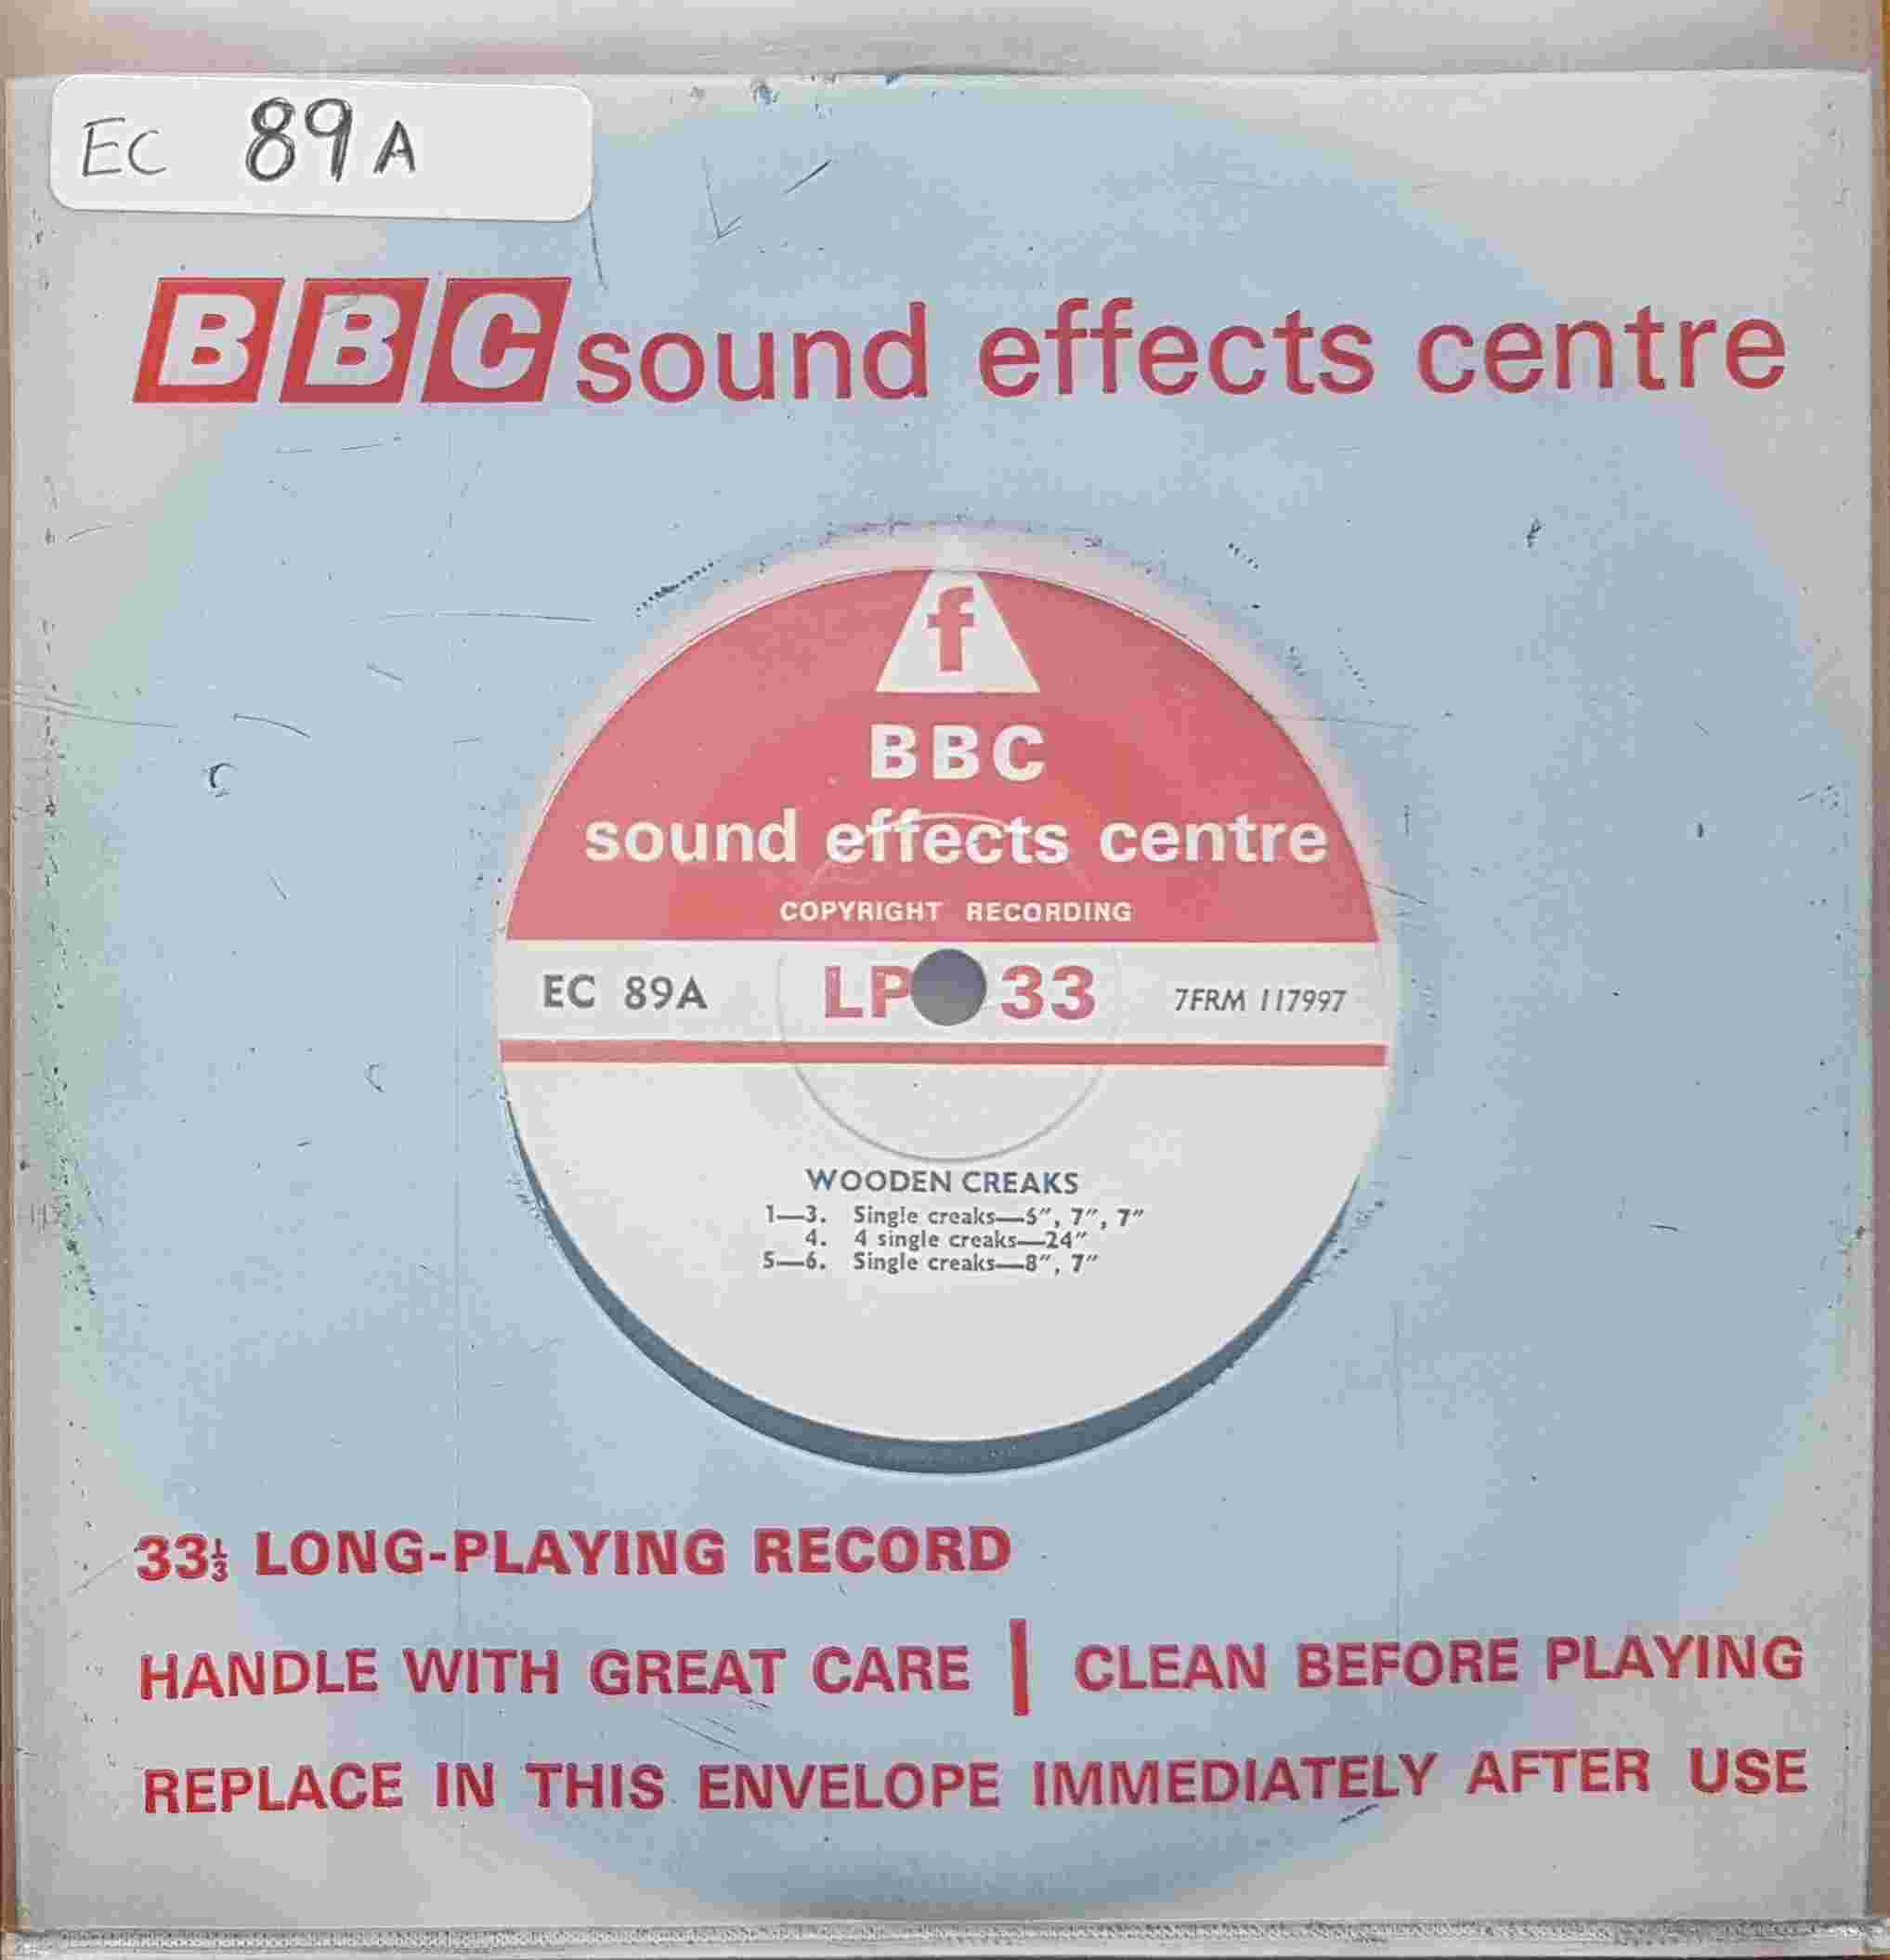 Picture of EC 89A Wooden creaks by artist Not registered from the BBC records and Tapes library